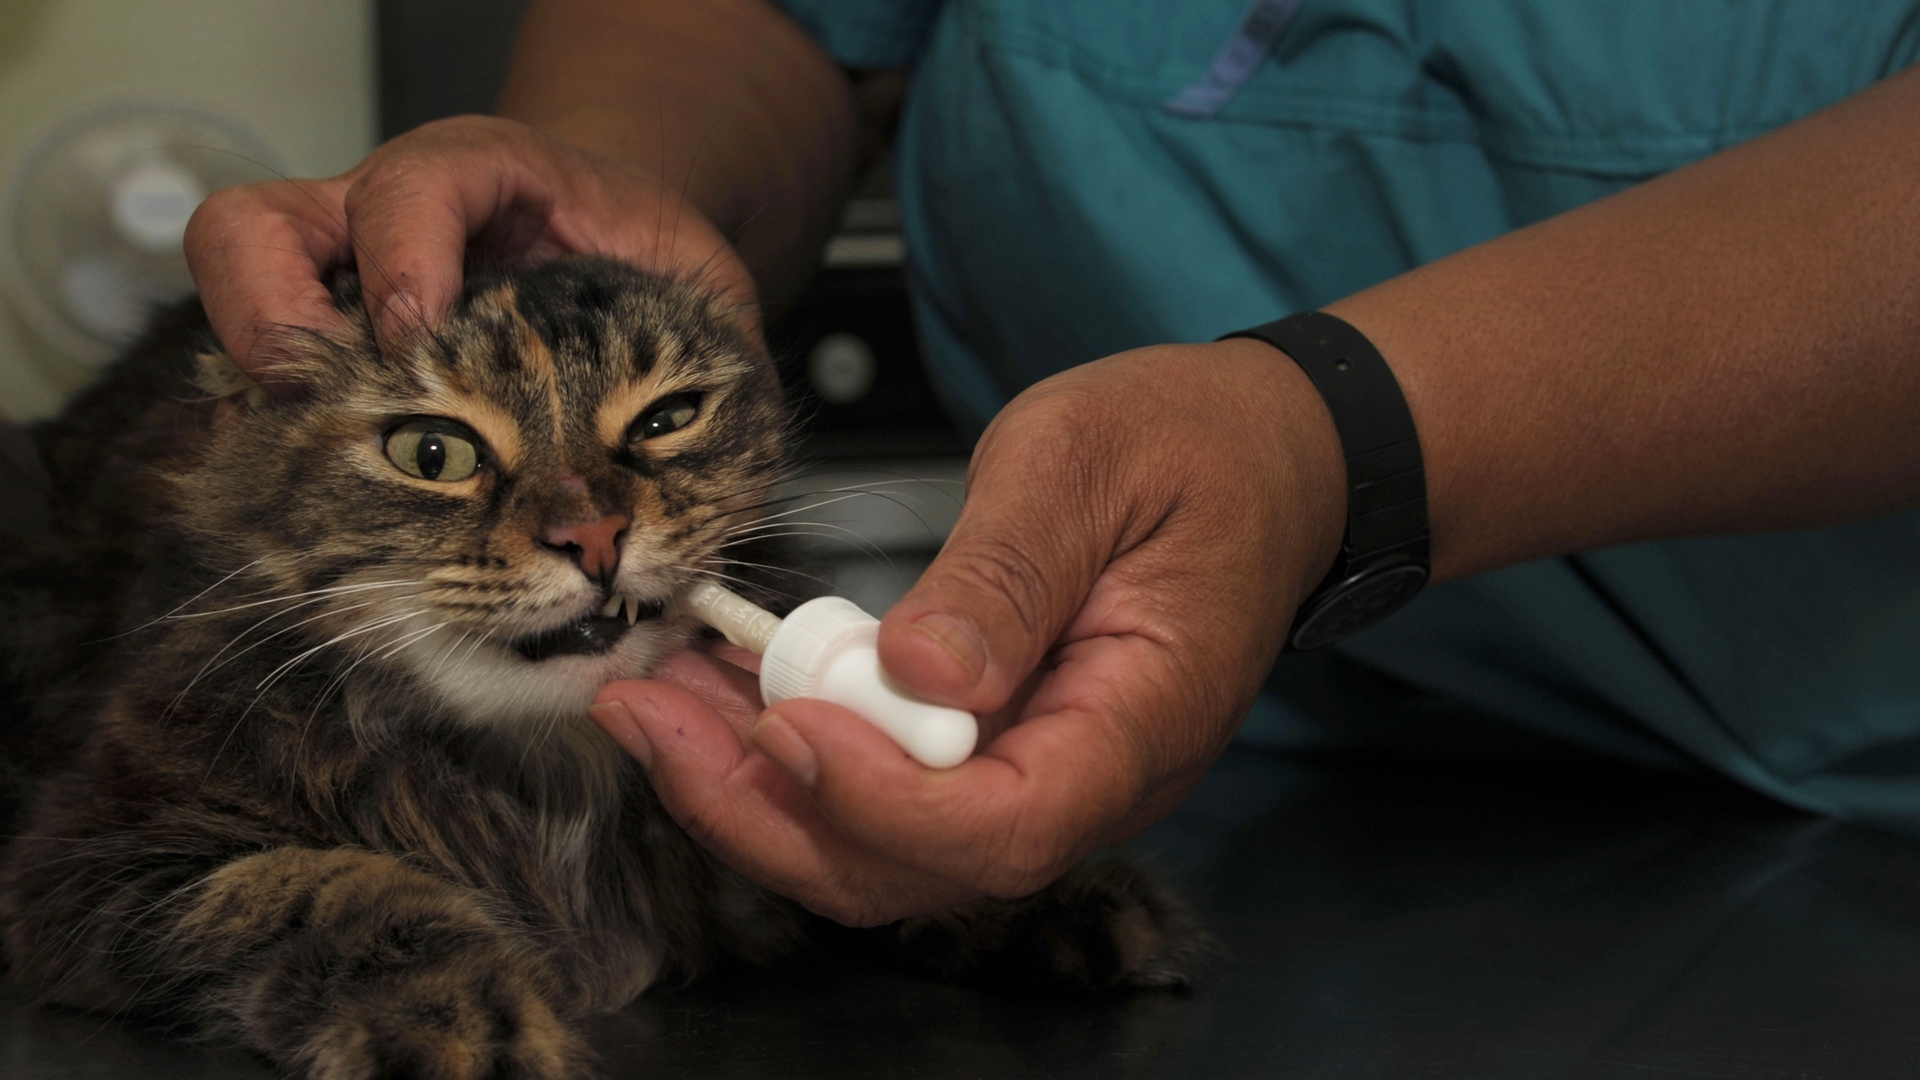 Vet clinic gives care, advice